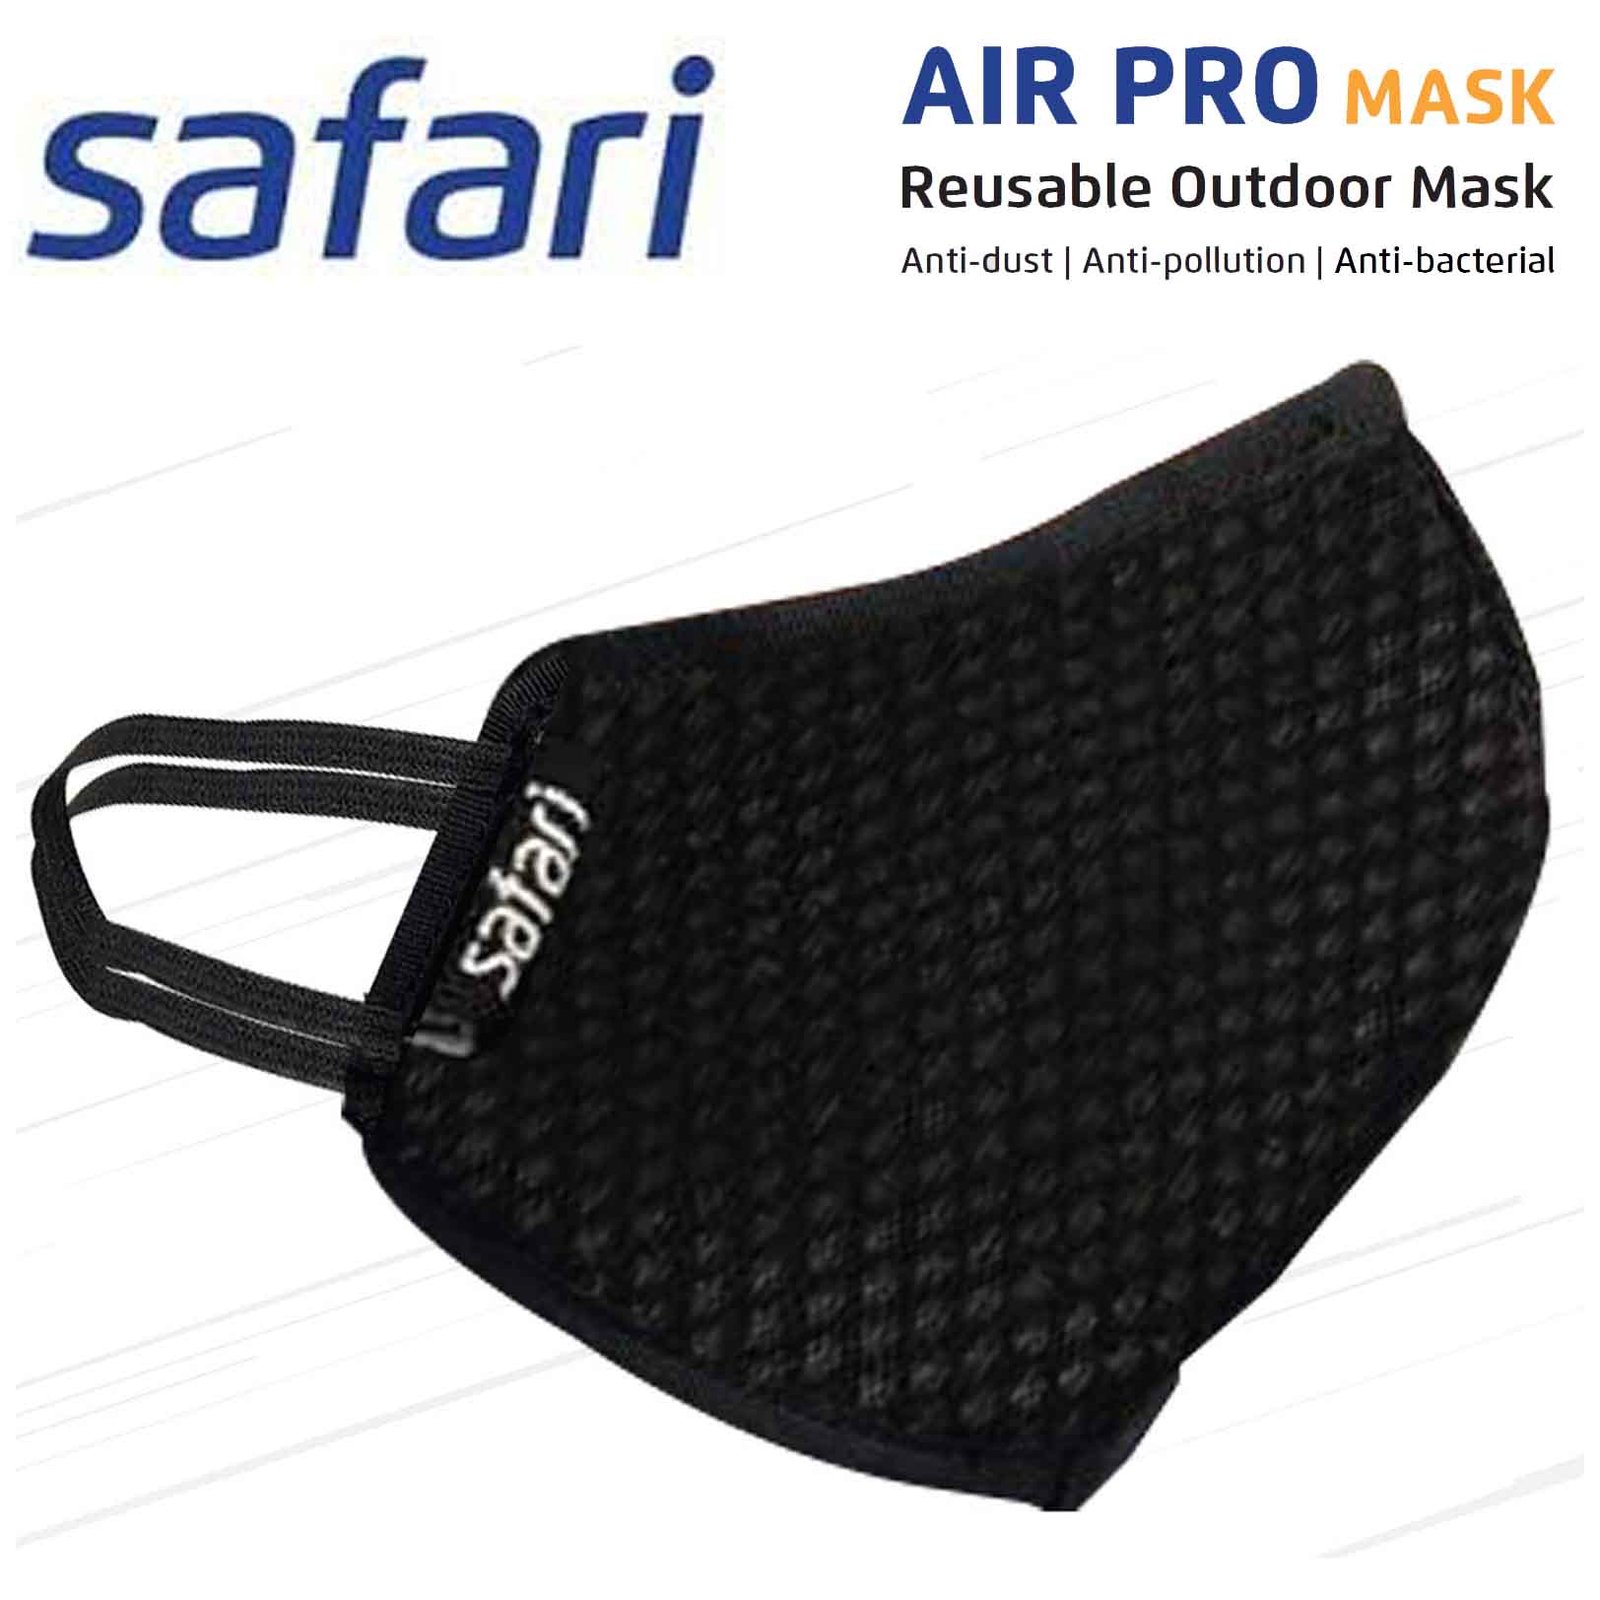 Luxury Designer Protective Face Mask Disposable Dust Sublimated